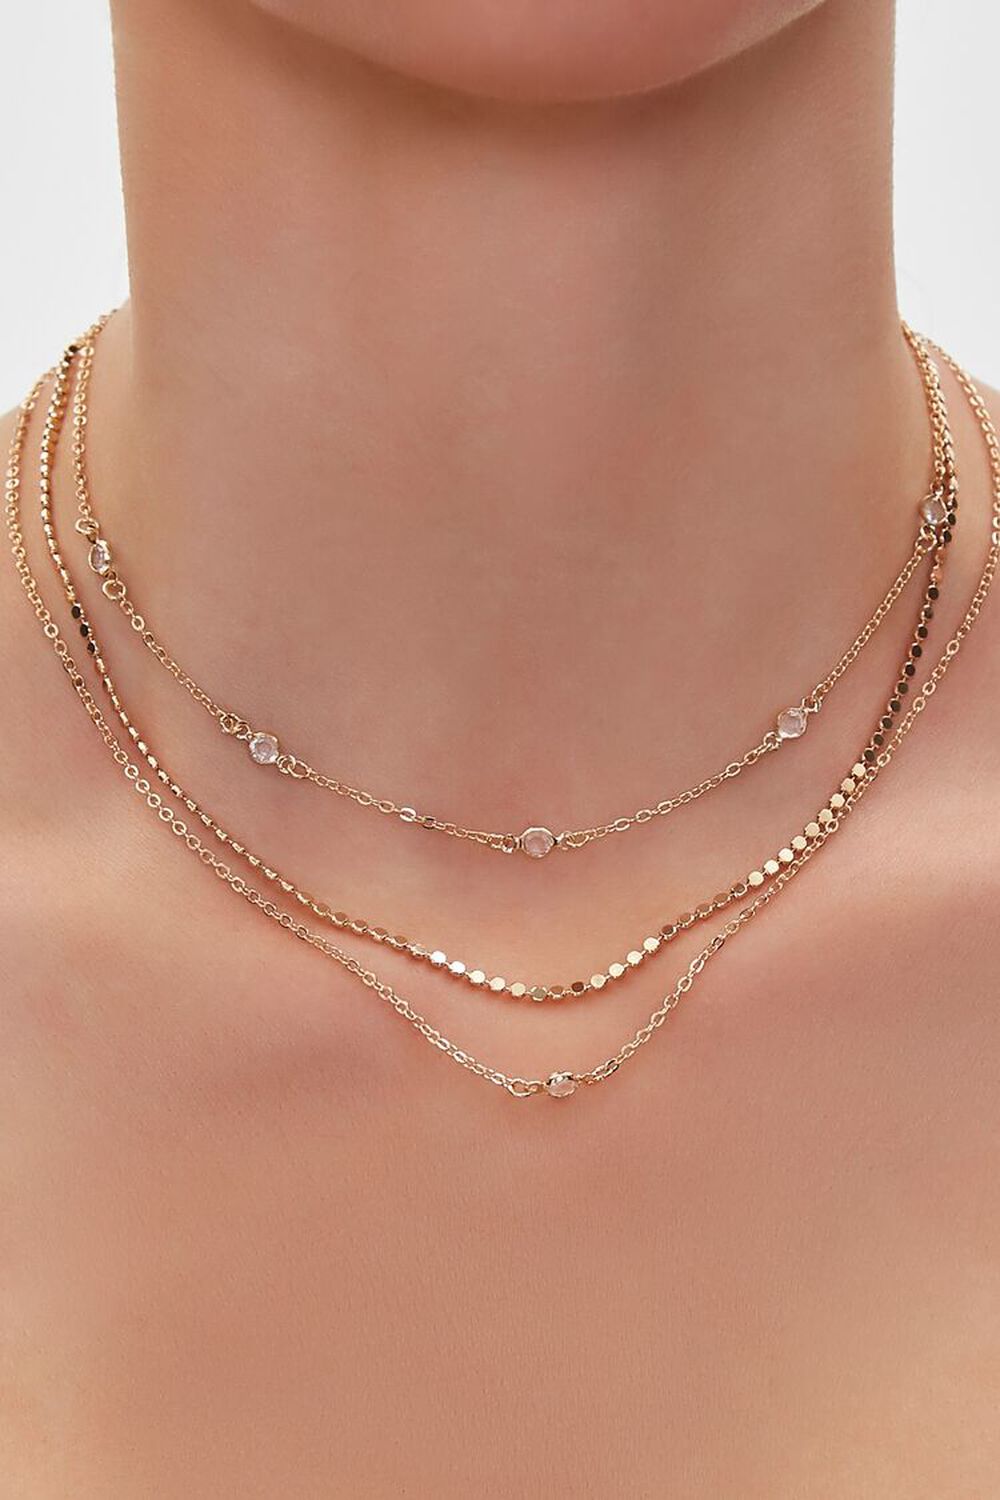 GOLD/CLEAR Faux Gem Layered Chain Necklace, image 1